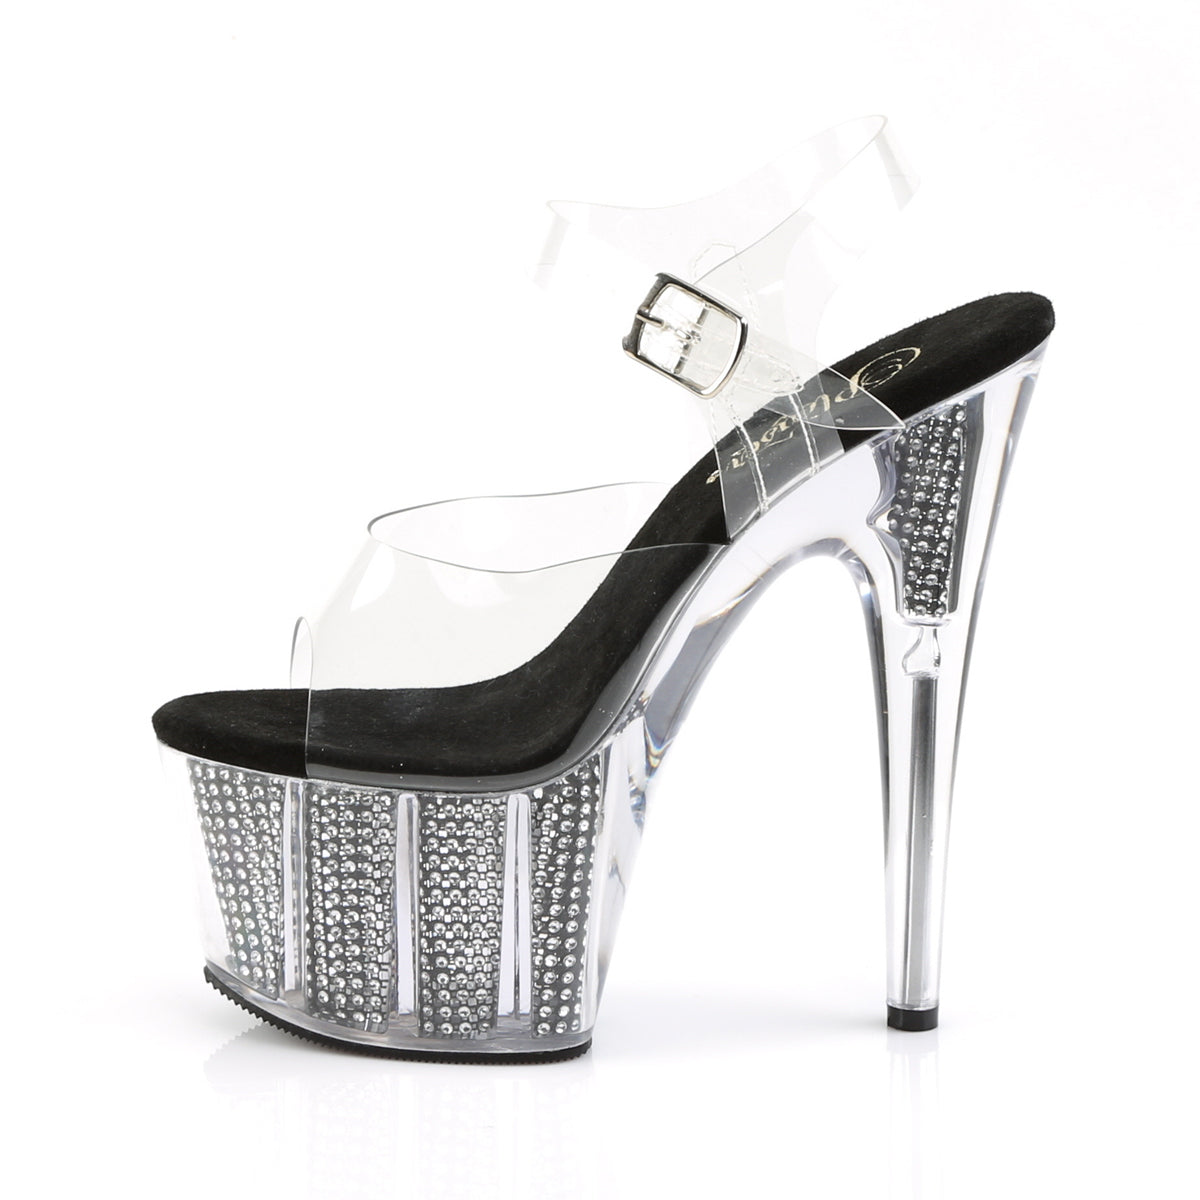 ADORE-708SRS 7 Inch Heel Clear Black Bling Fetish Sandals-Pleaser- Sexy Shoes Pole Dance Heels